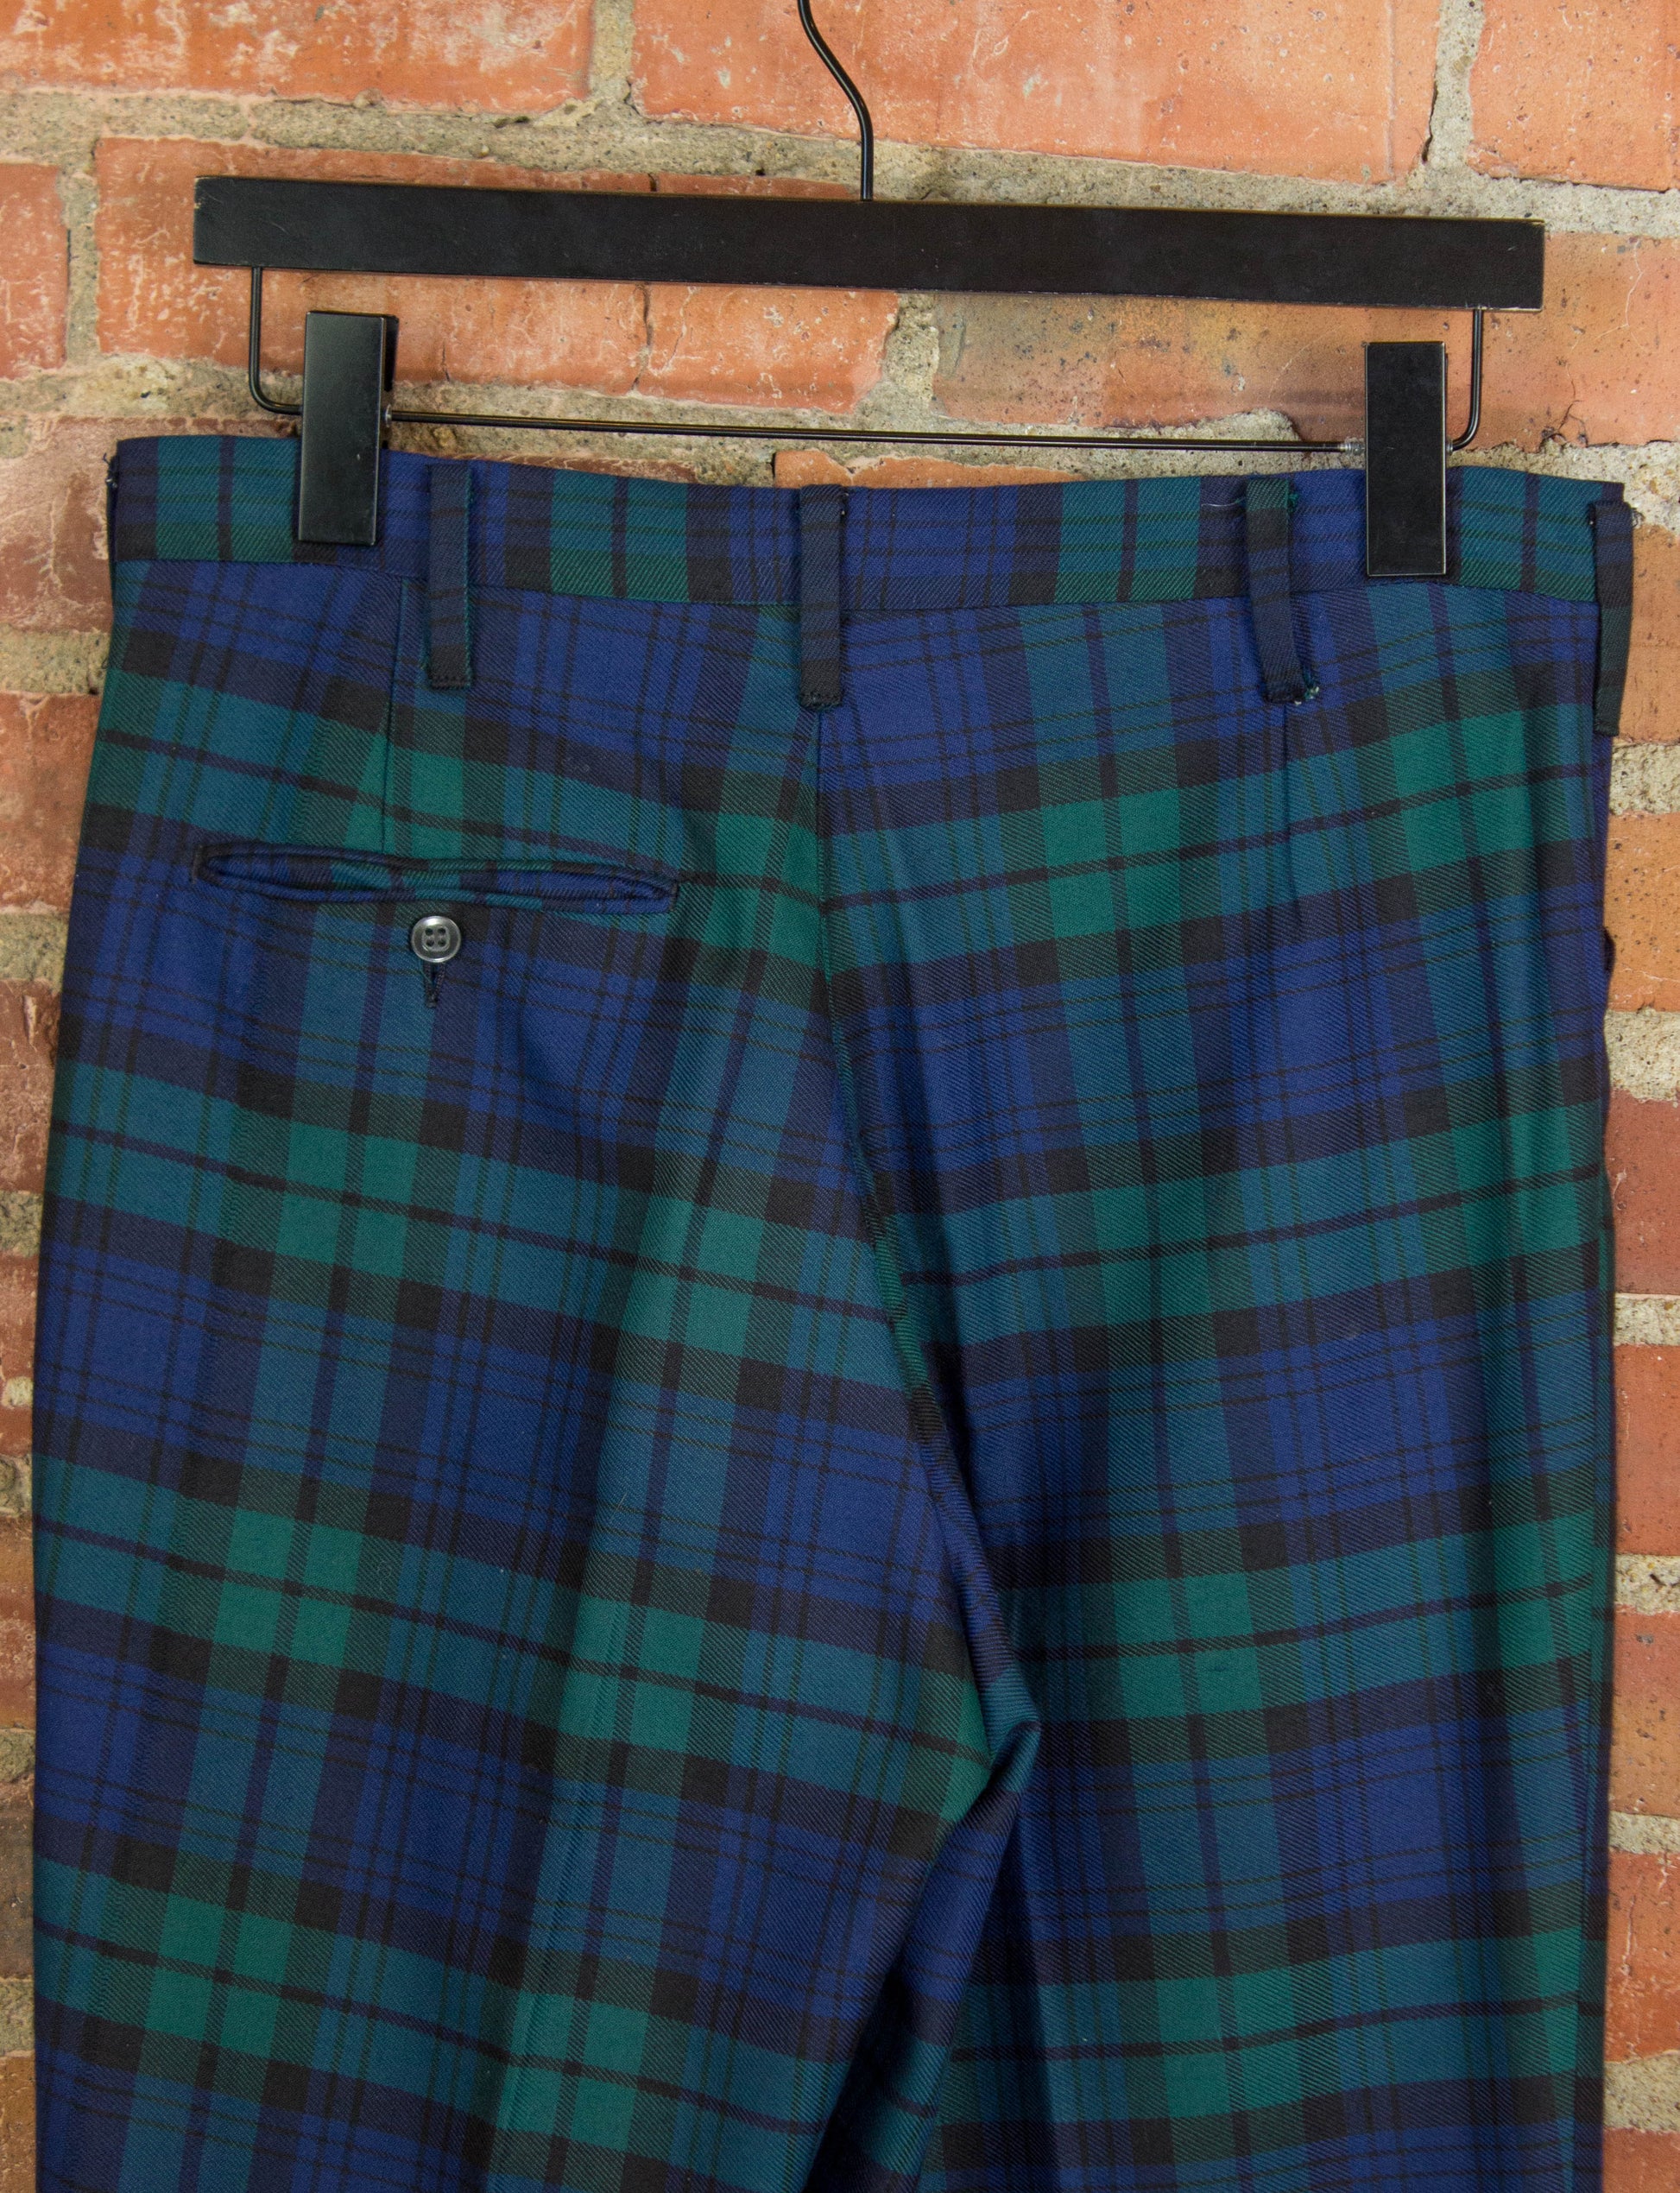 Vintage 70s Galey and Lord Green and Blue Plaid Slacks Size 30x32